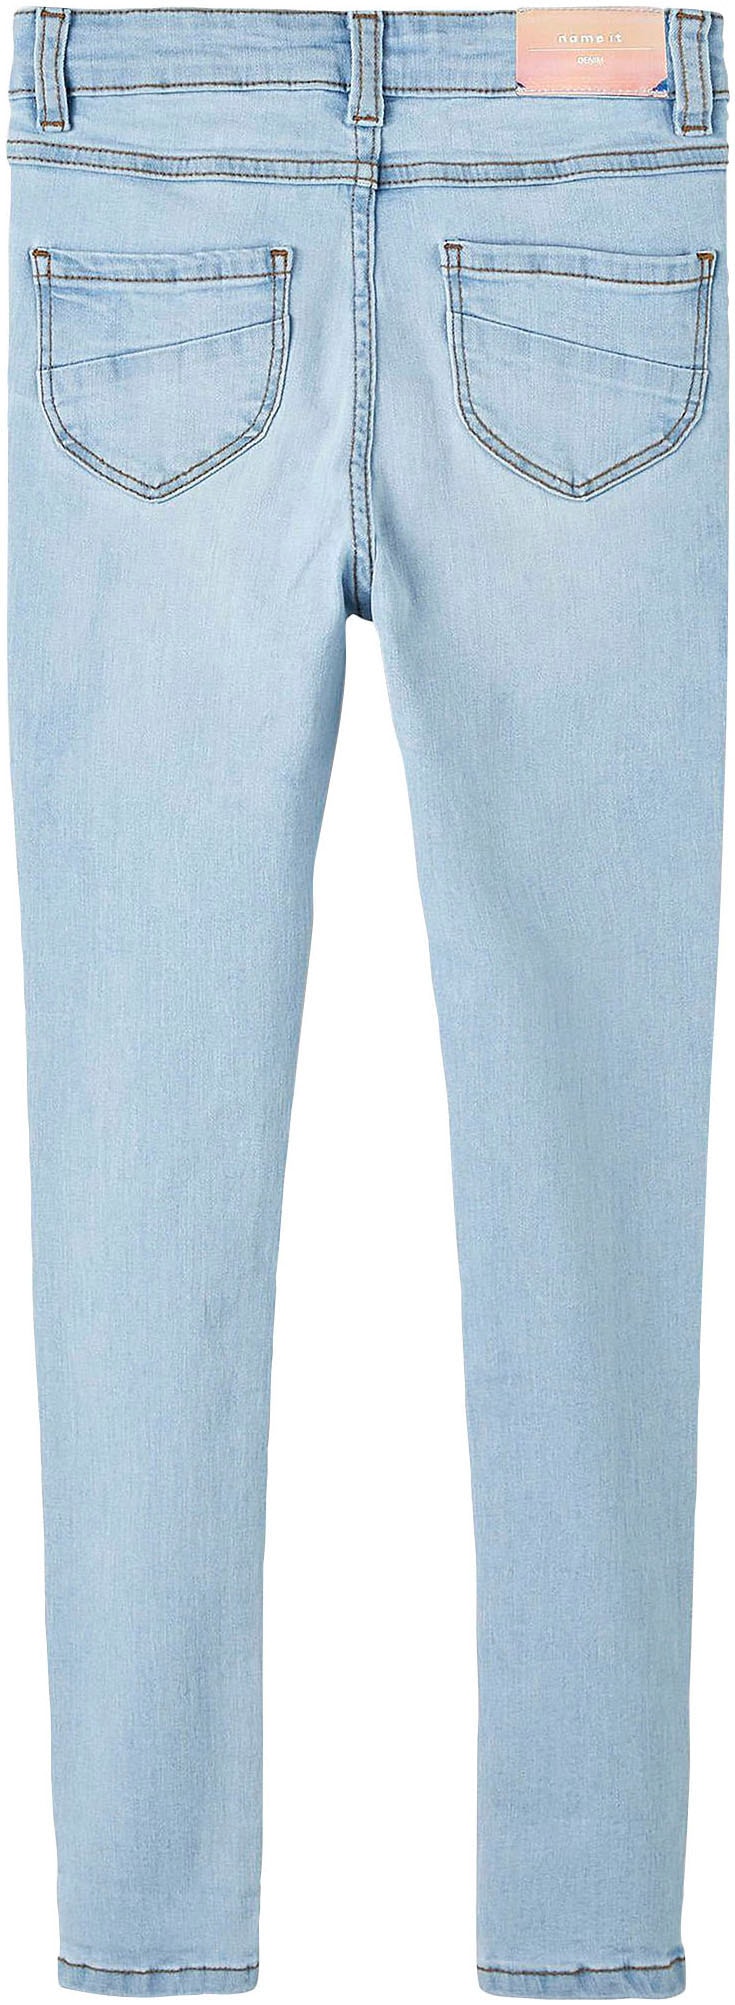 Name It Skinny-fit-Jeans NOOS«, »NKFPOLLY kaufen bei SKINNY HW mit Stretch JEANS OTTO 1180-ST